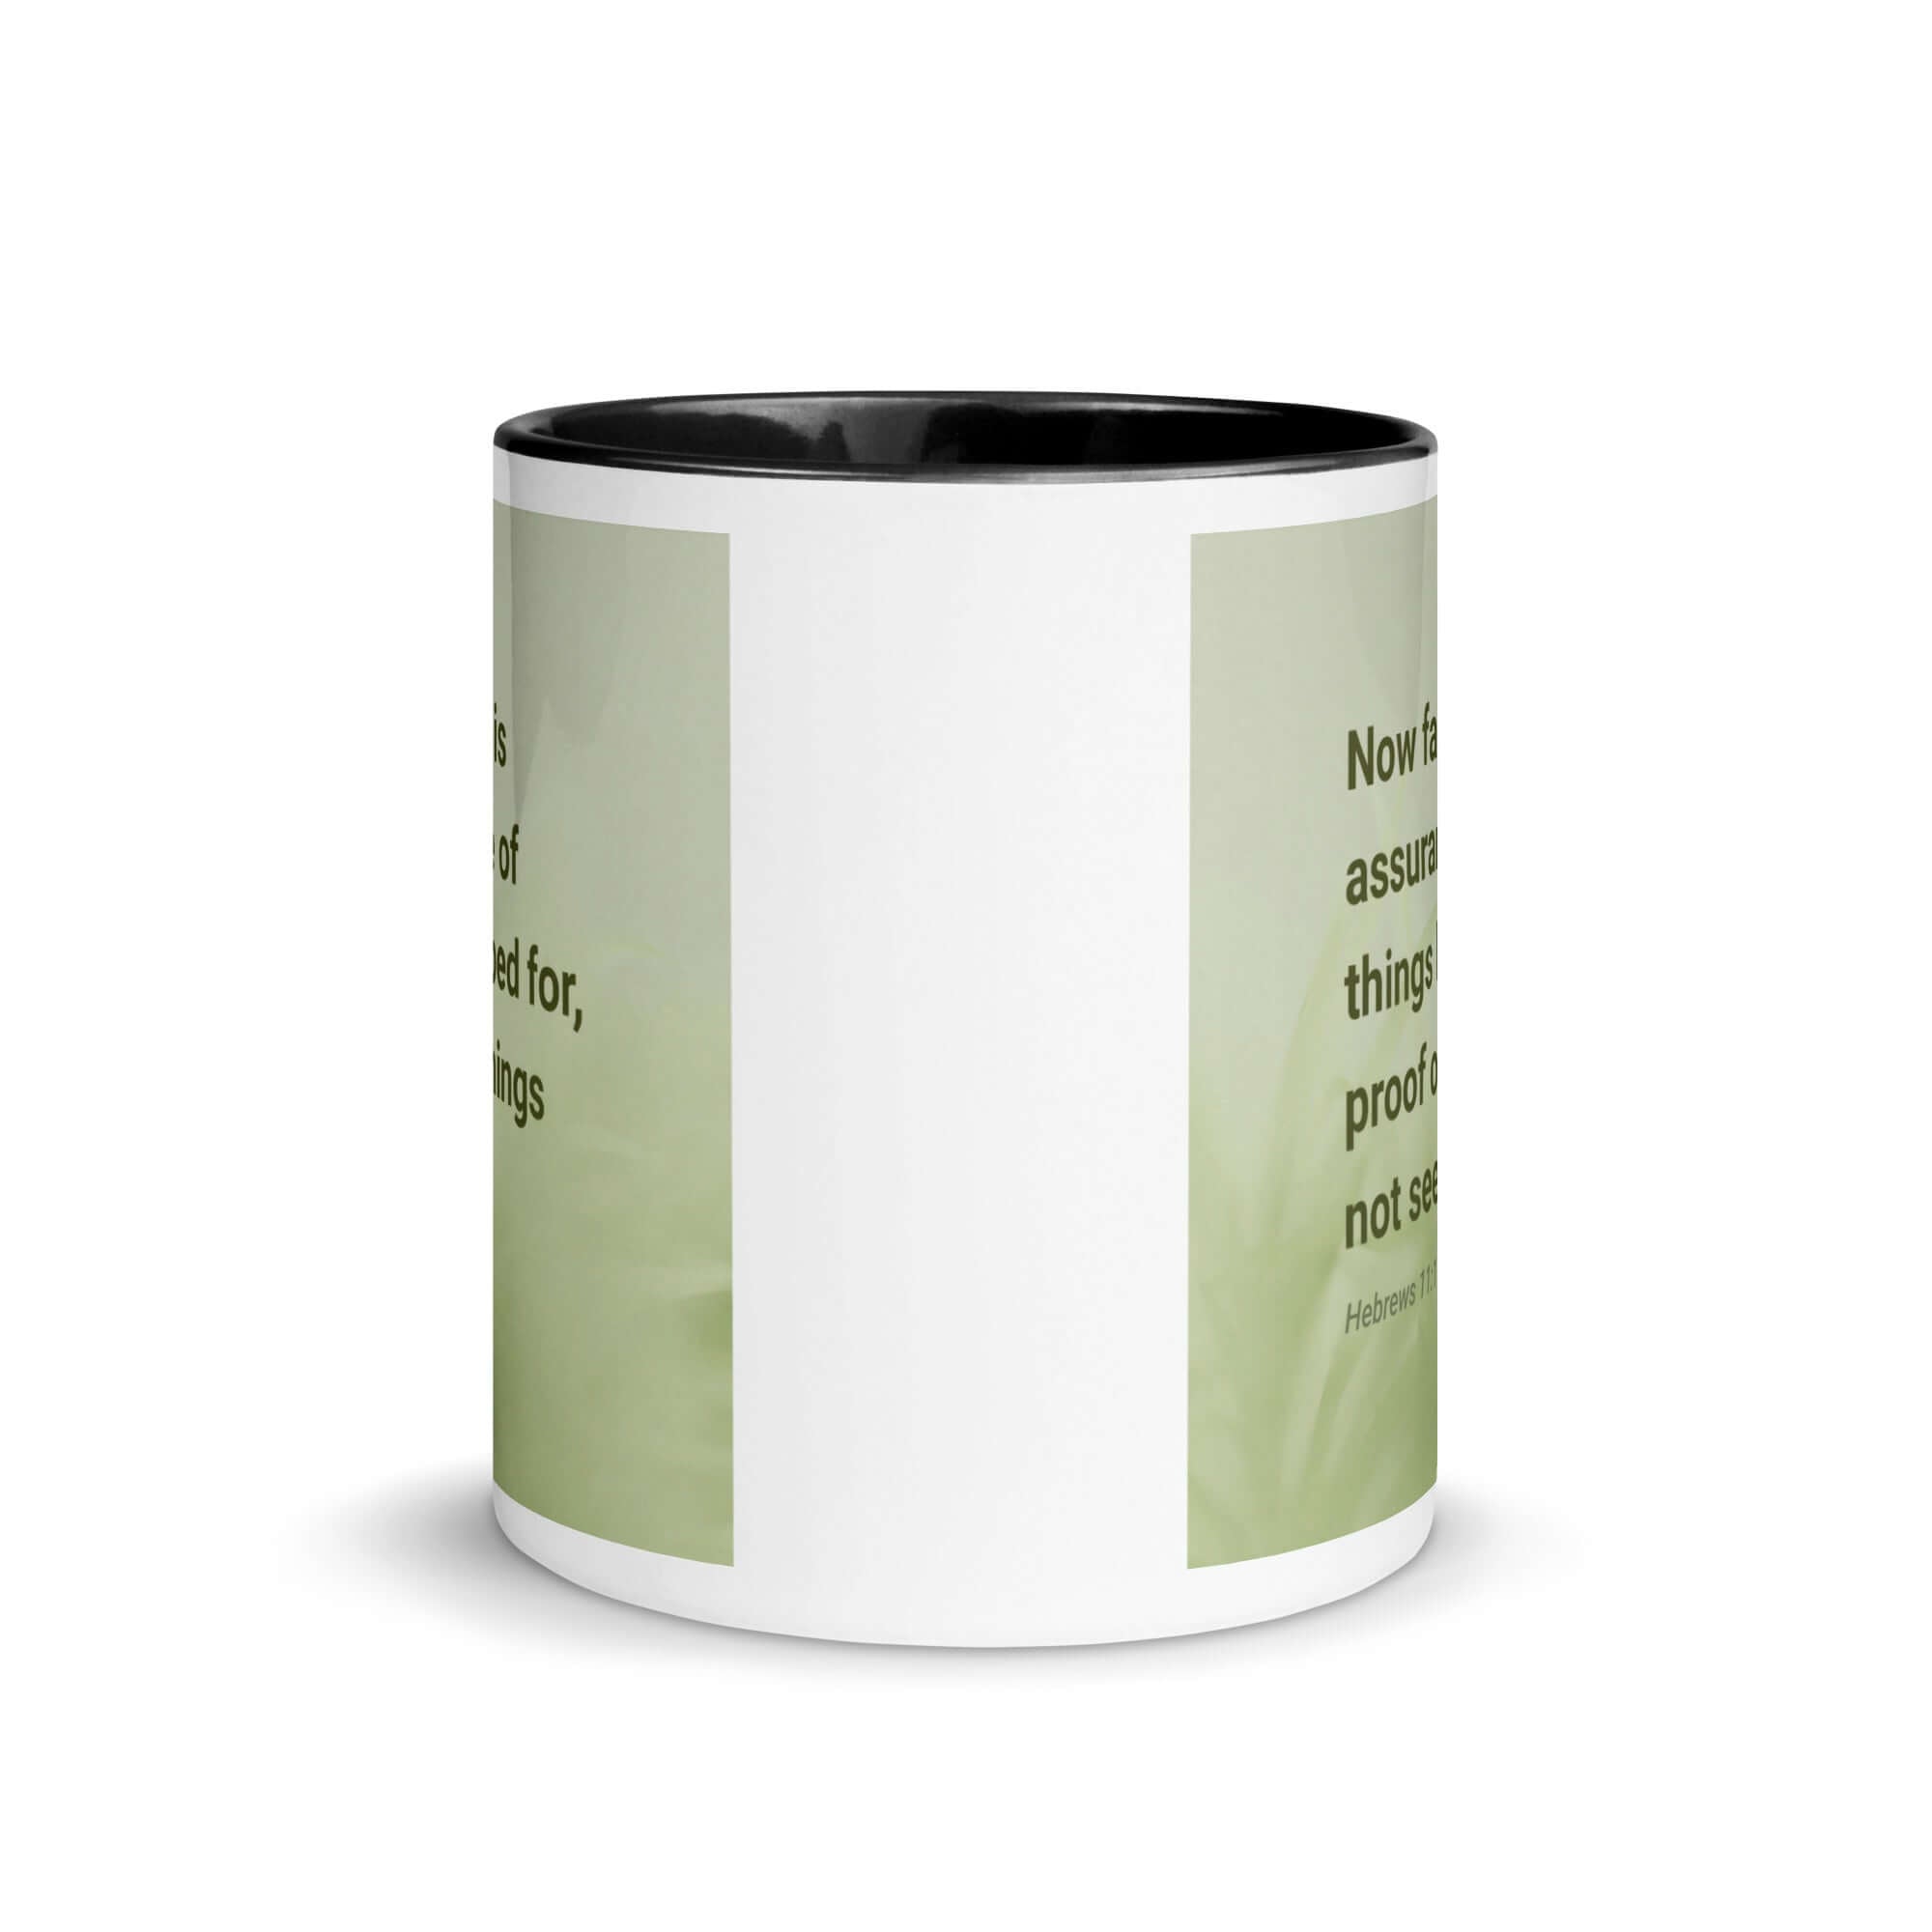 Heb 11:1 - Bible Verse, faith is assurance White Ceramic Mug with Color Inside